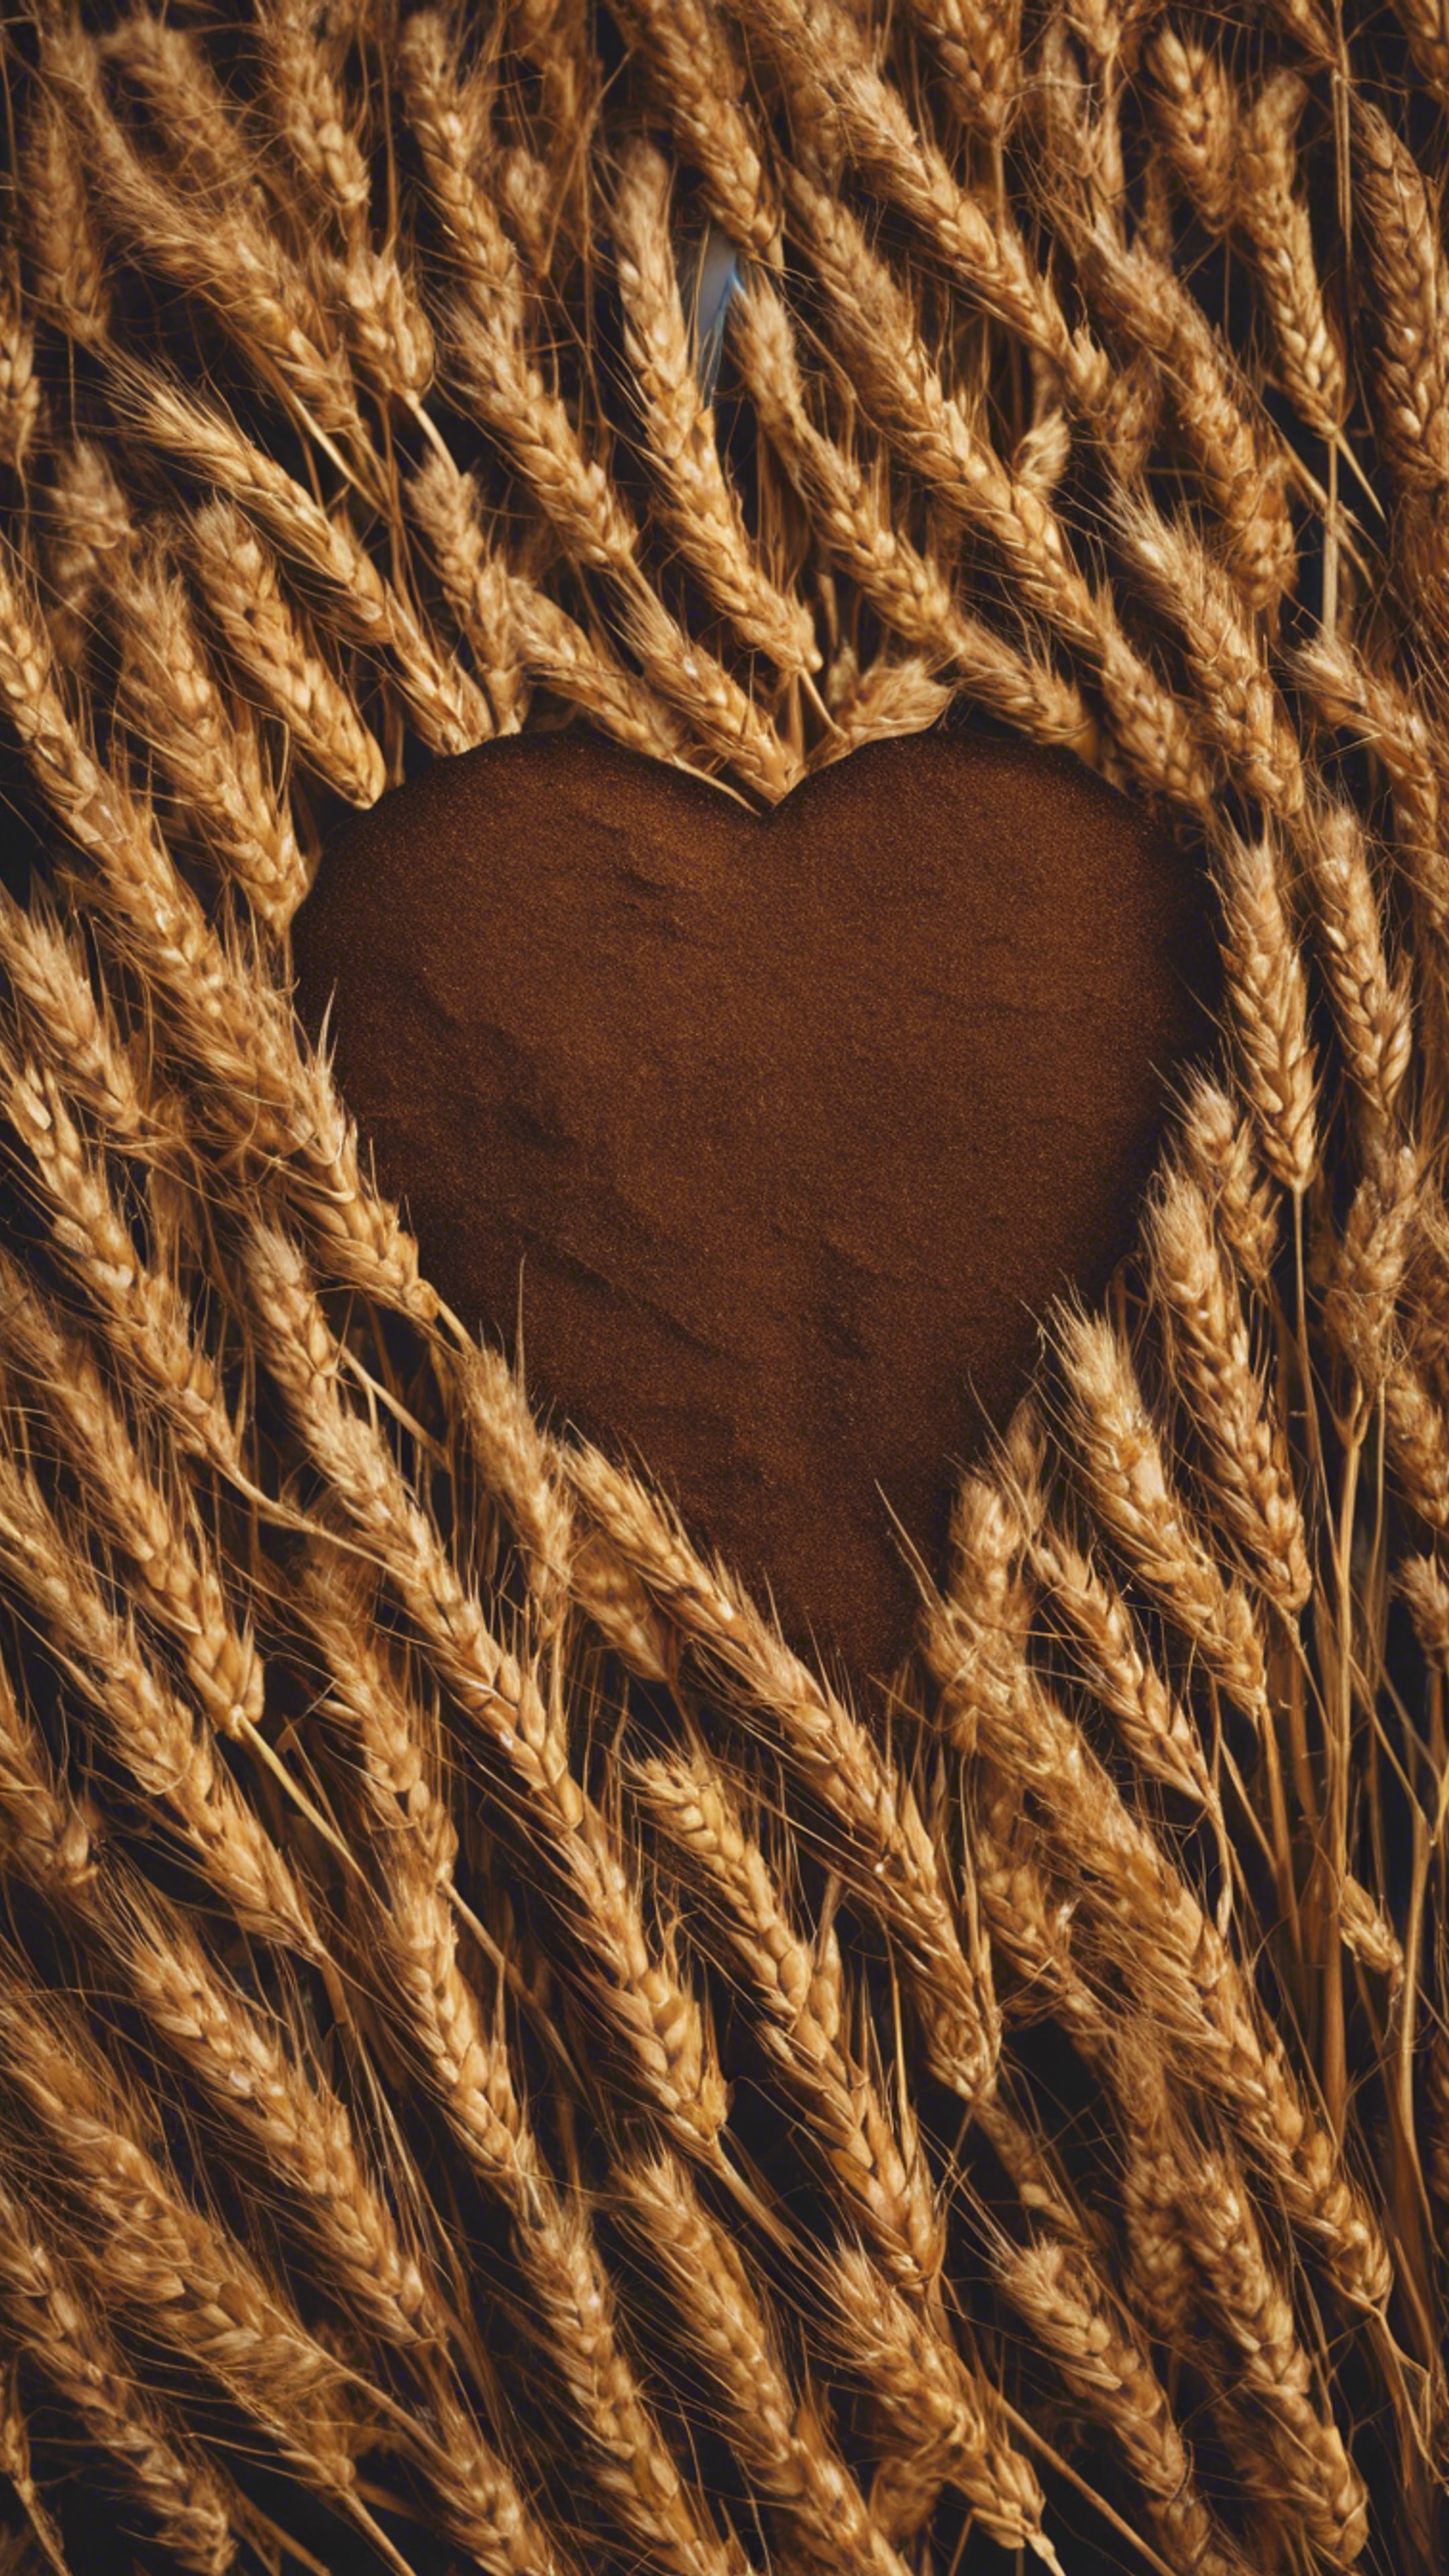 A heart-shaped, dark brown patch in a field of golden wheat seen from above.壁紙[d29ece6b4a104c38b579]